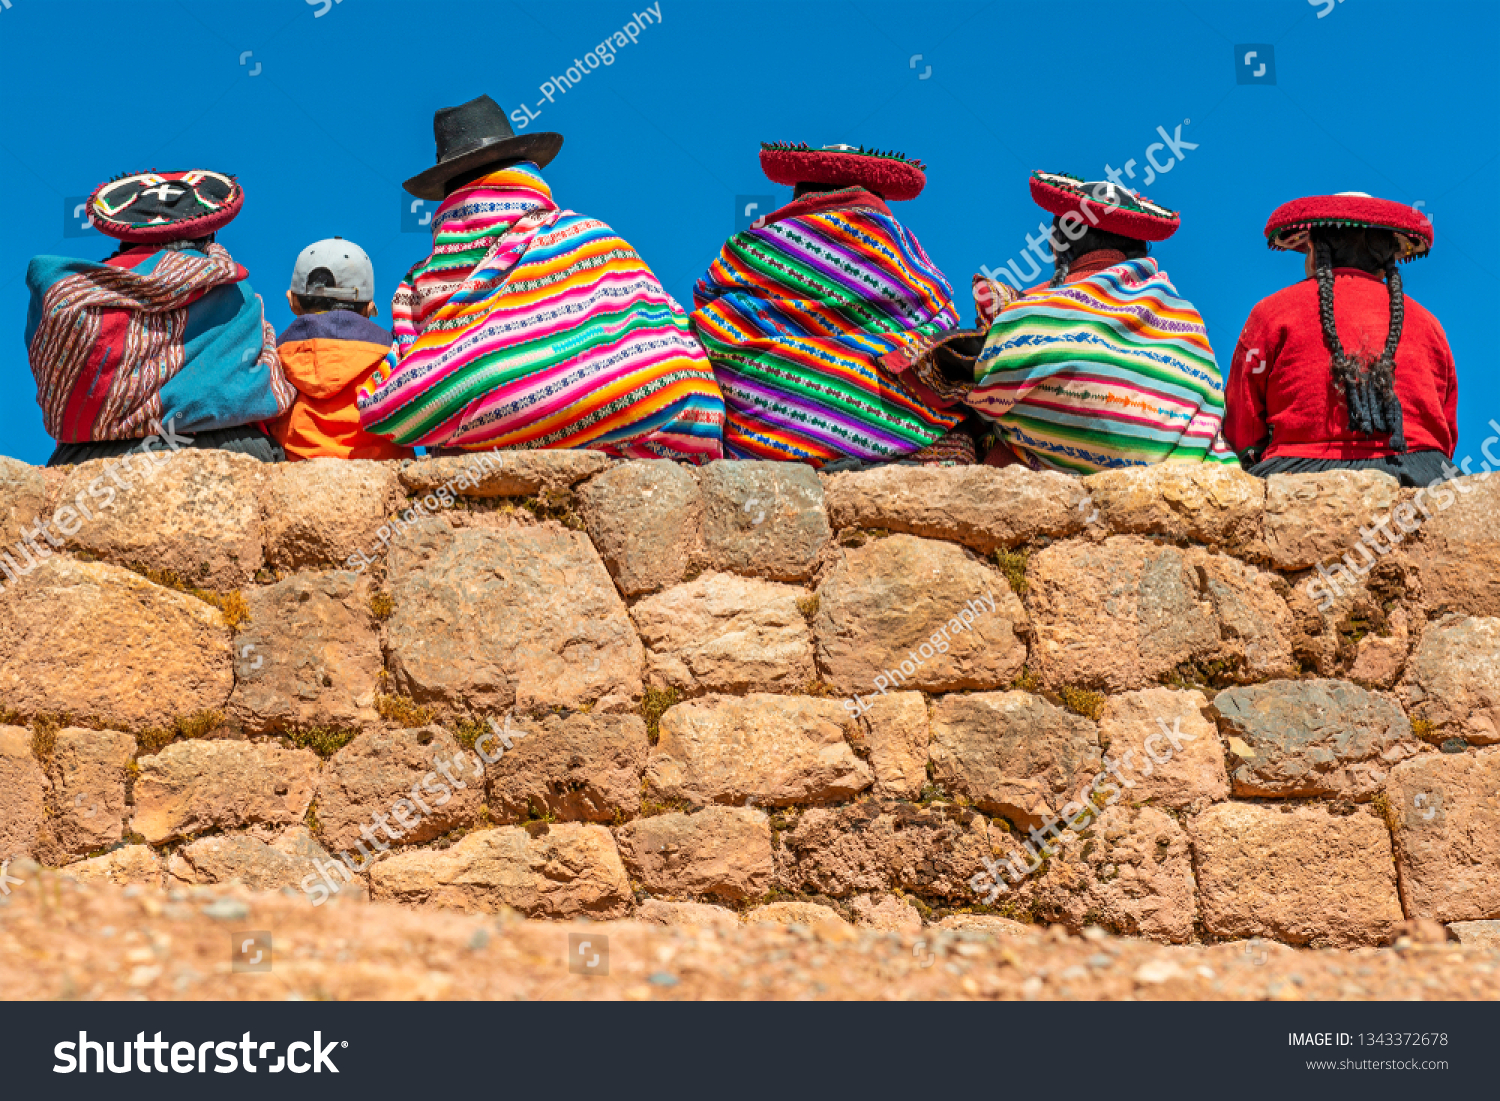 A group of Quechua indigenous women in traditional clothing and a young boy sitting and chatting on an ancient Inca wall in the archaeological site of Chinchero in the region of Cusco city, Peru. #1343372678